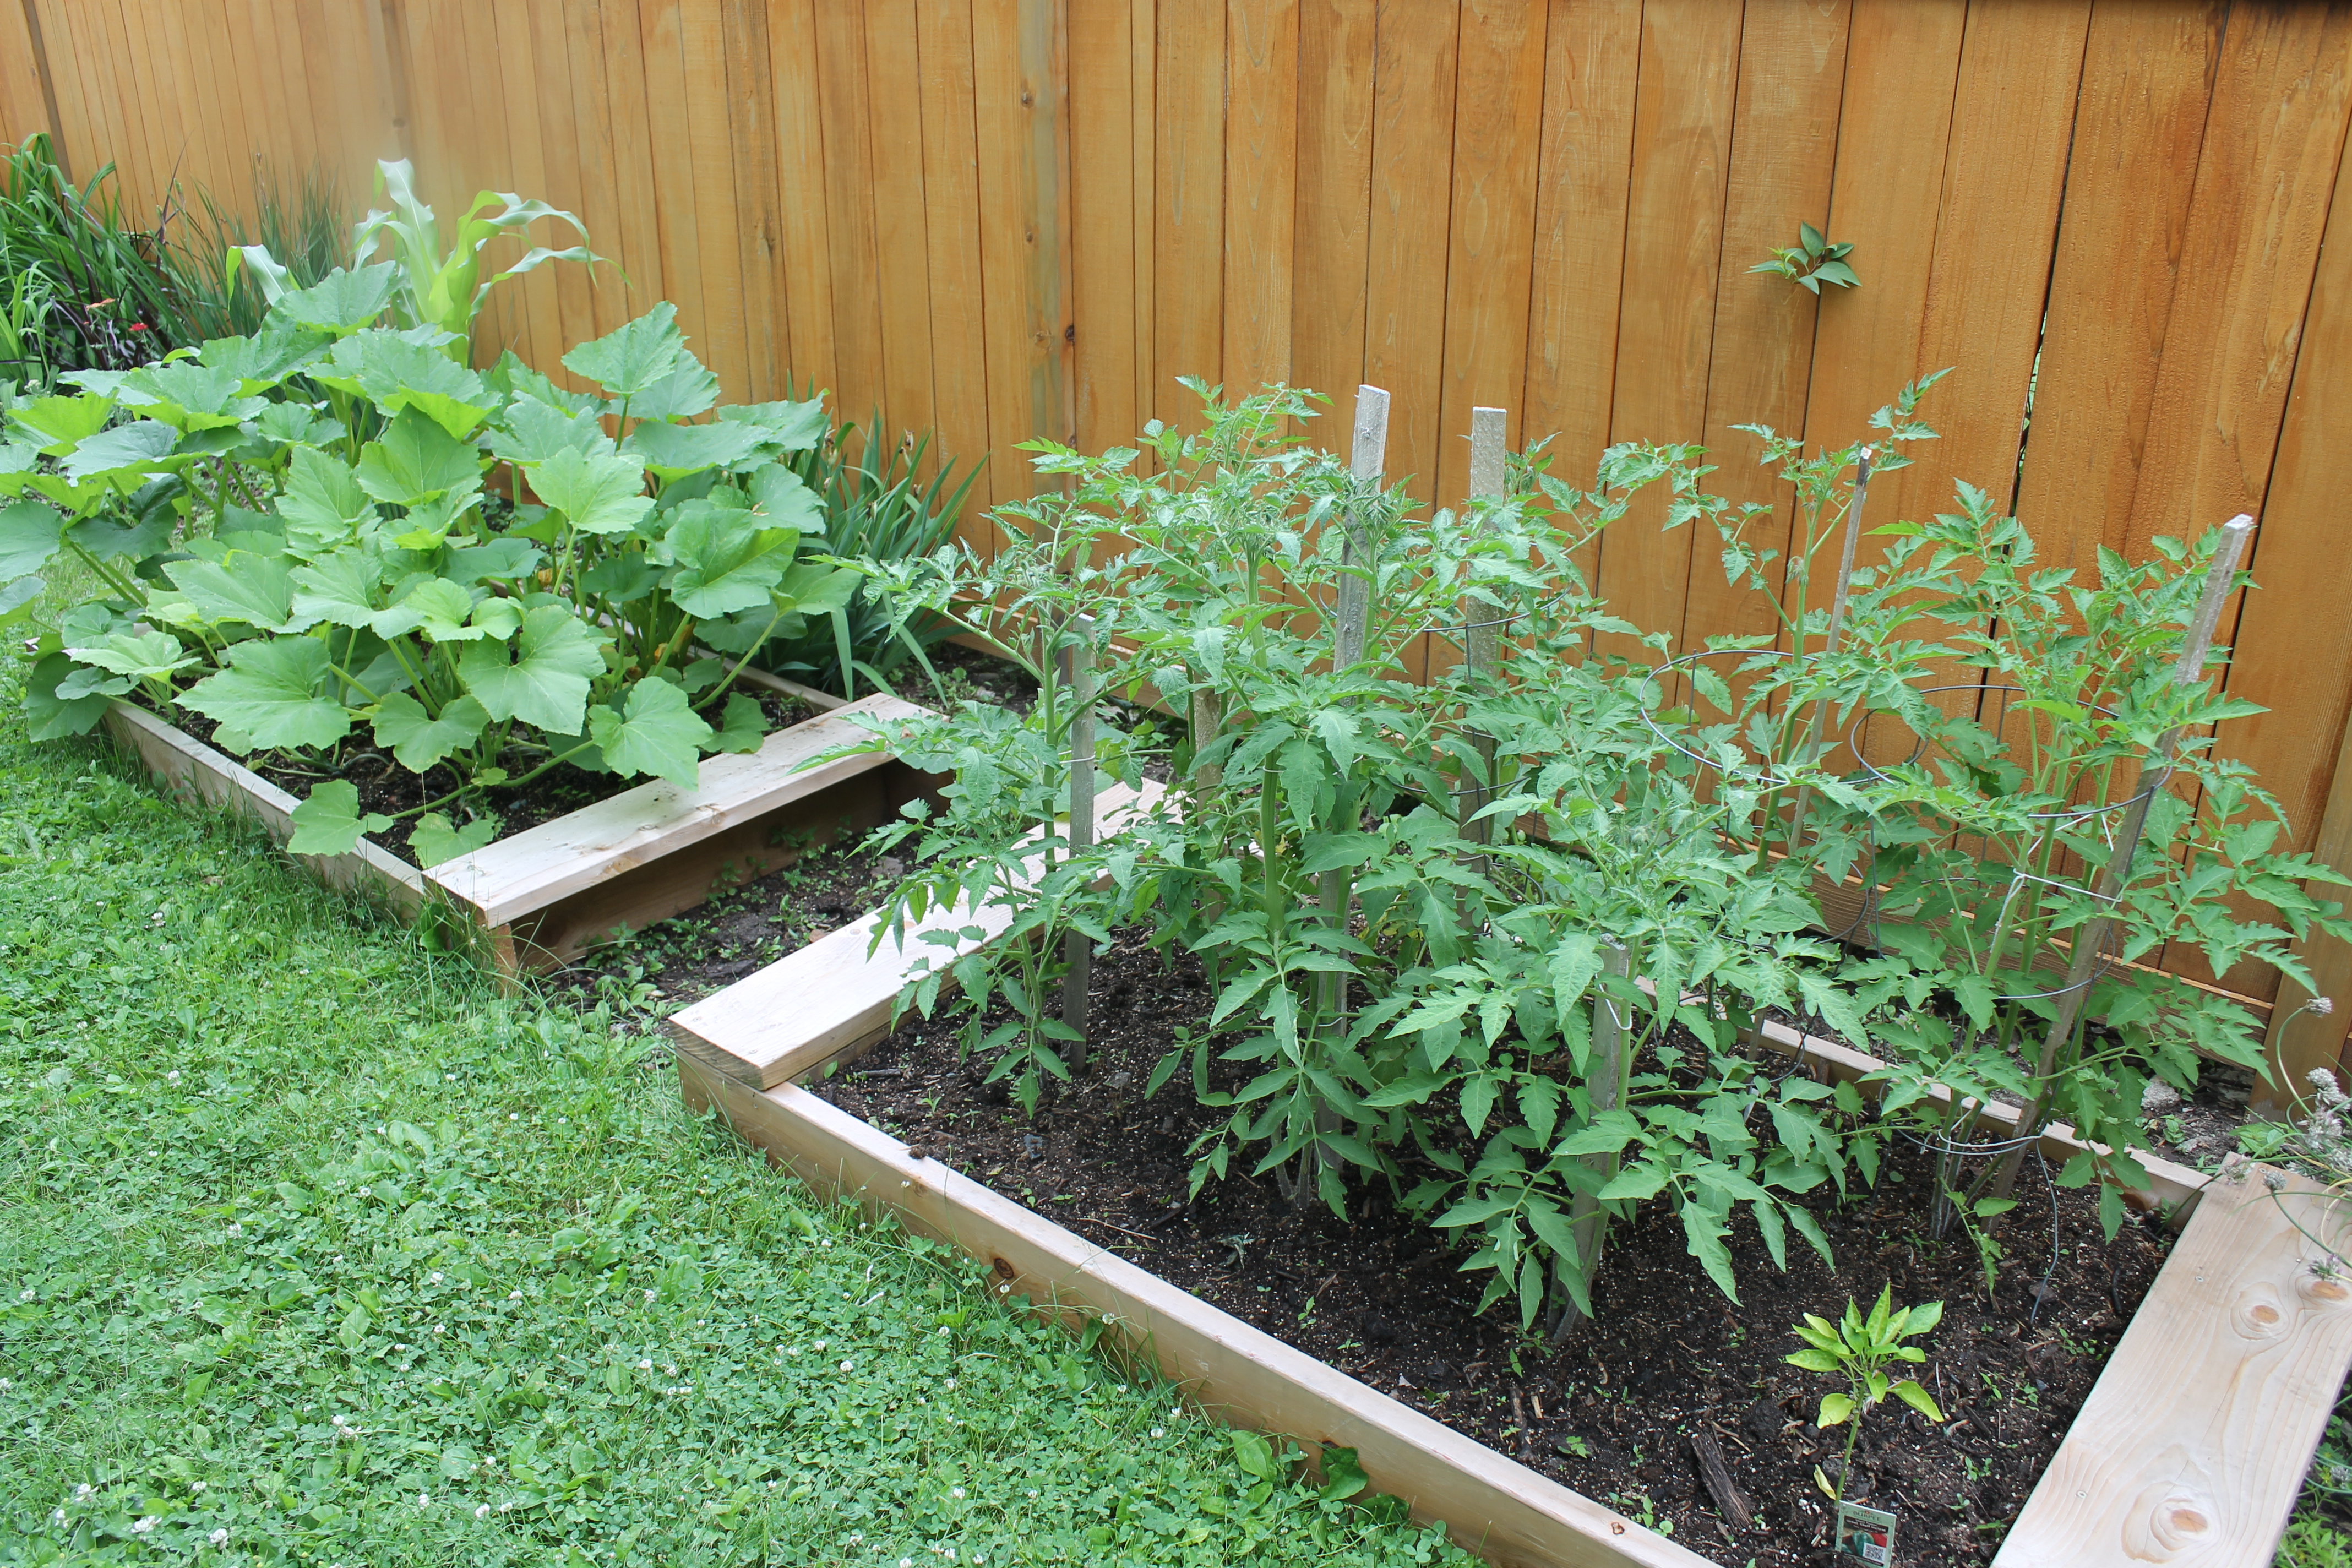 Raised Bed Garden with Tomato and Zucchini plants.